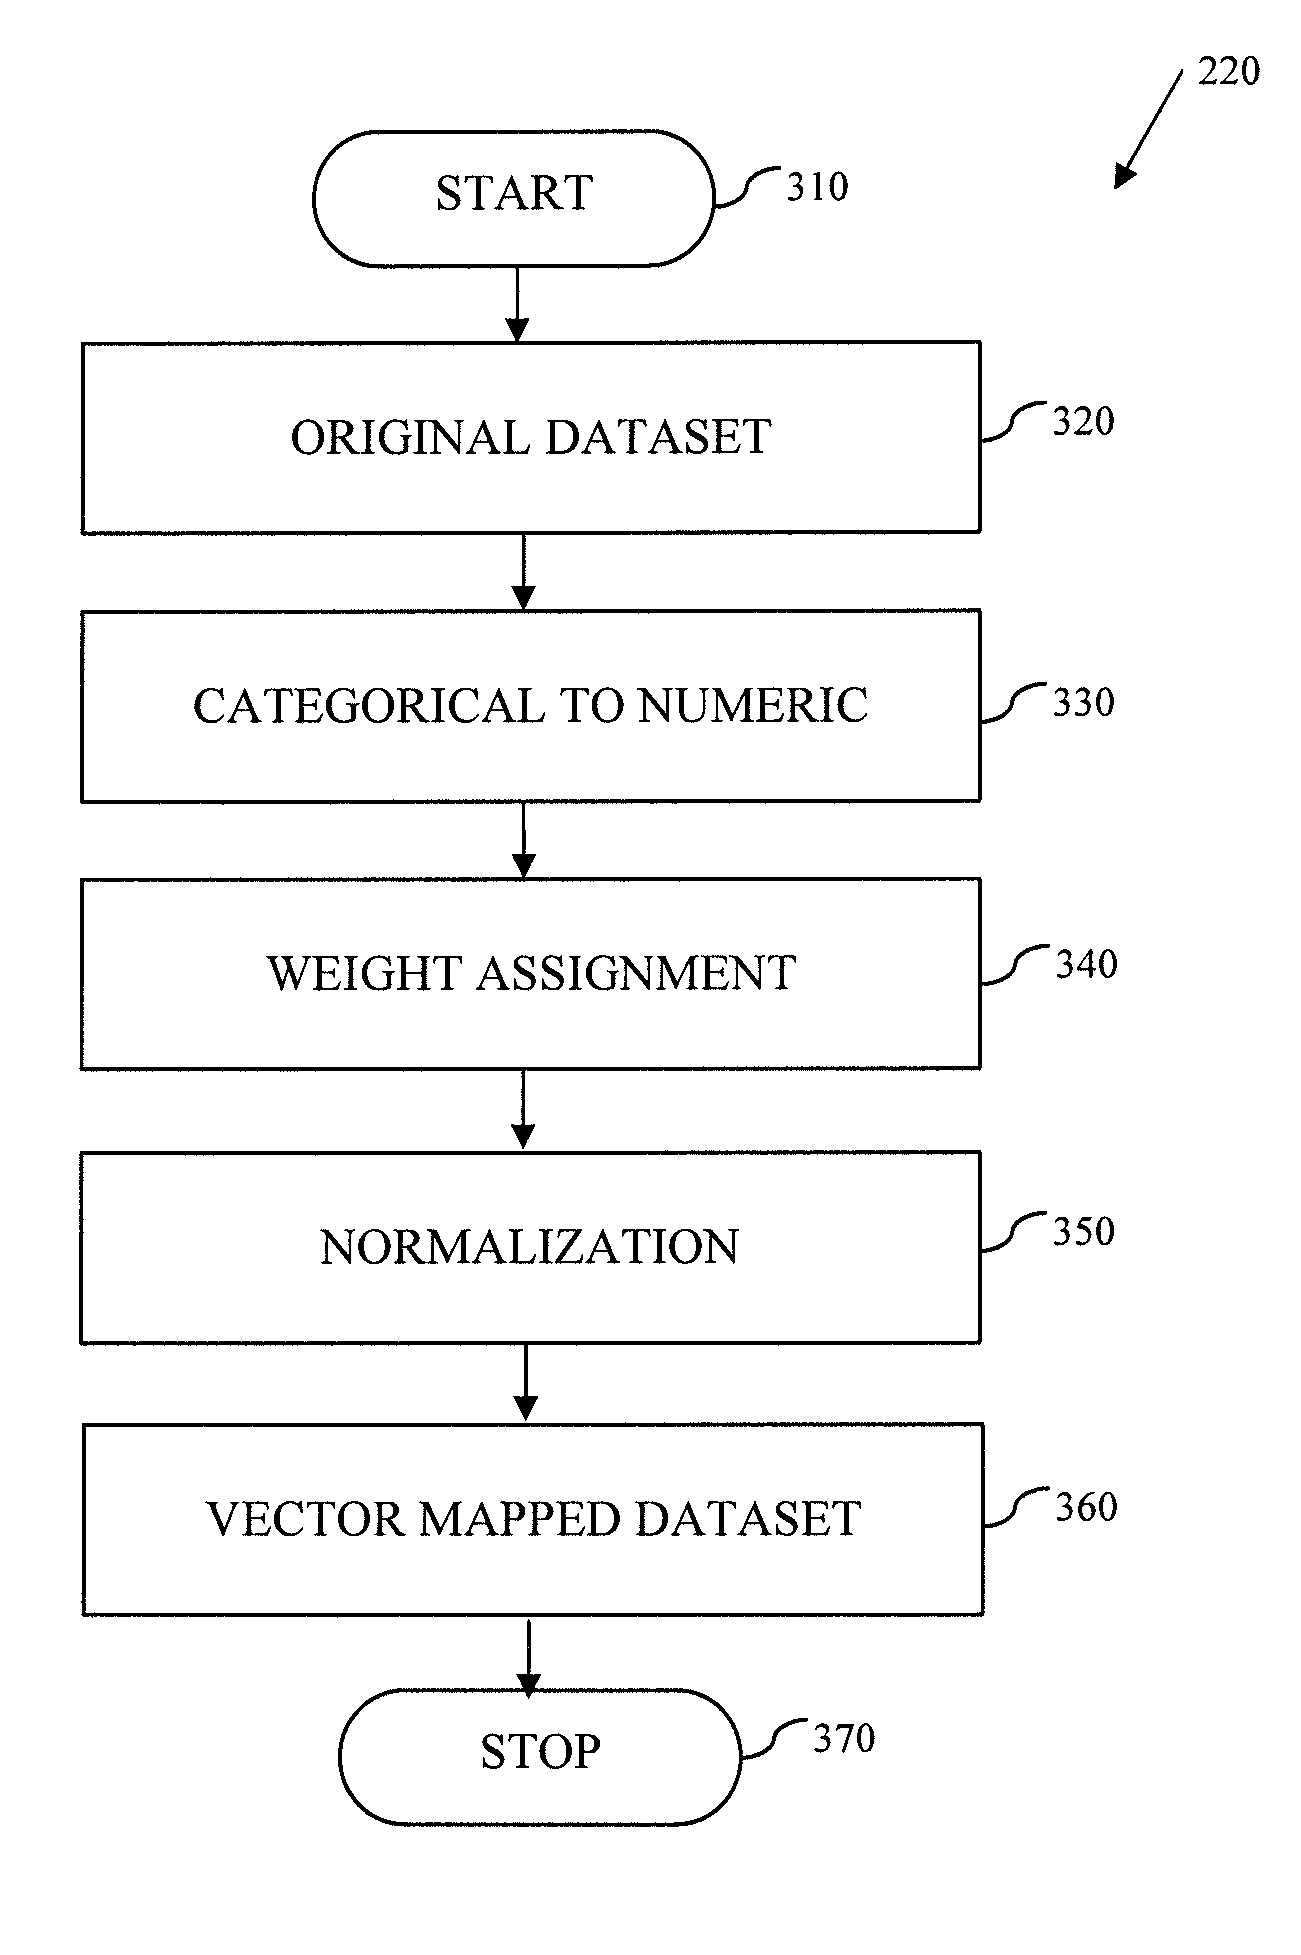 System and method for data anonymization using hierarchical data clustering and perturbation